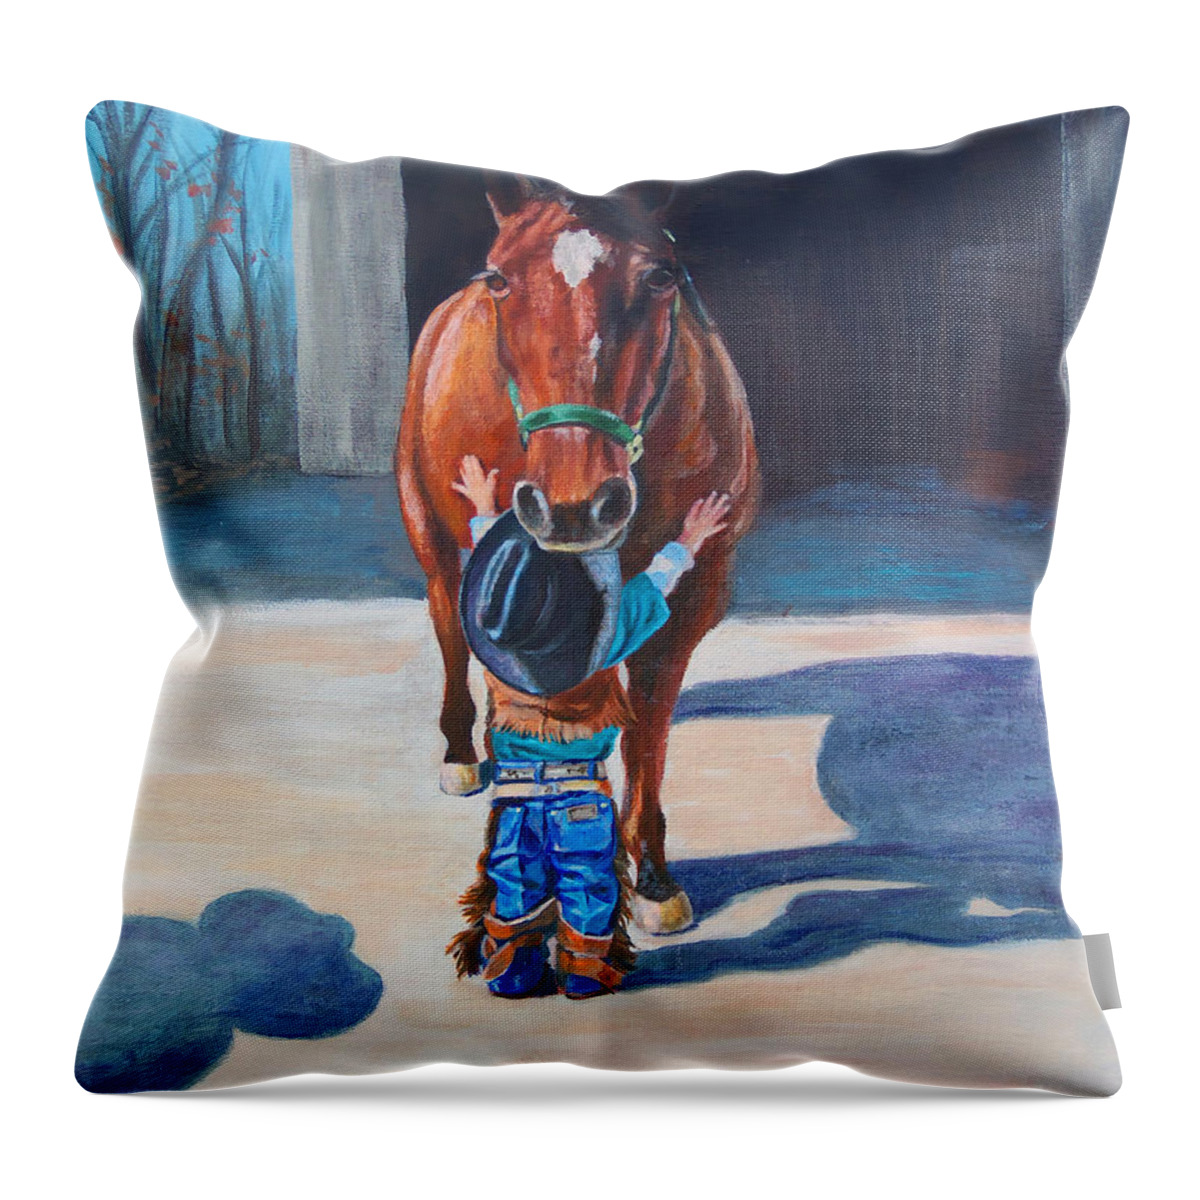 Little Cowboy Art Throw Pillow featuring the painting Cowboy's First Love by Karen Kennedy Chatham